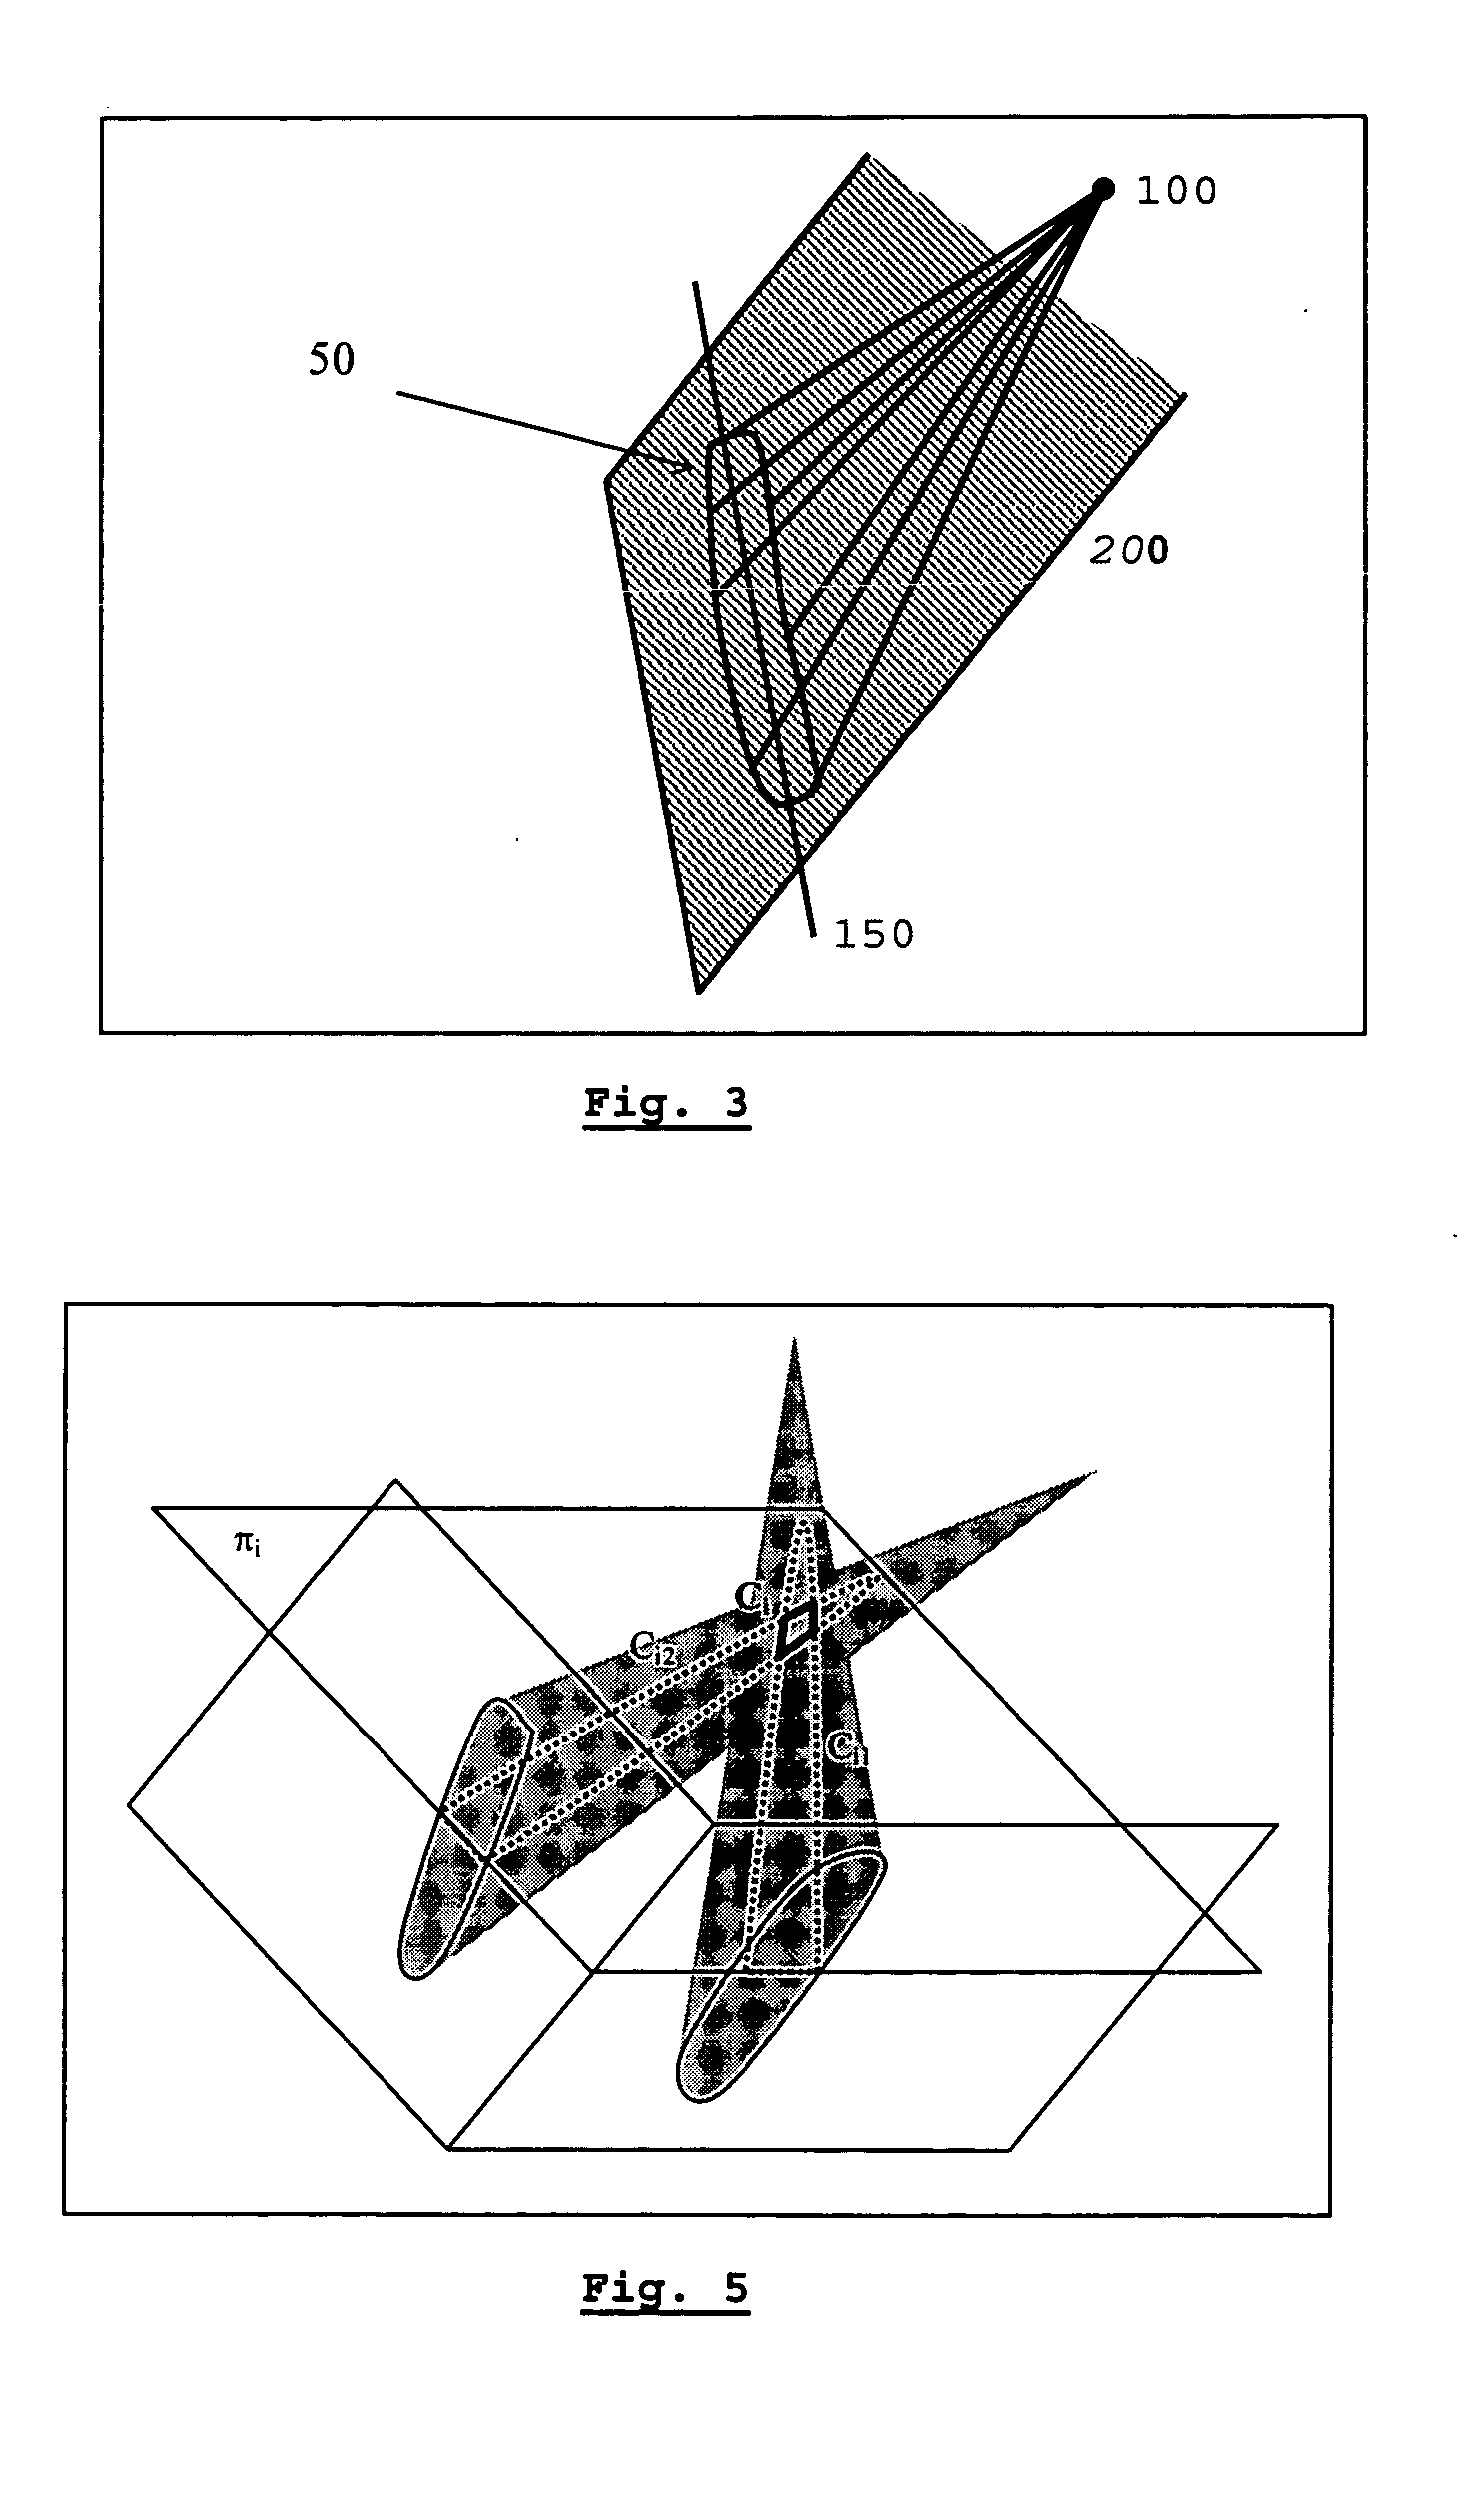 Process for the acquisition of information intended for the insertion of a locking screw into an orifice of an endomedullary device